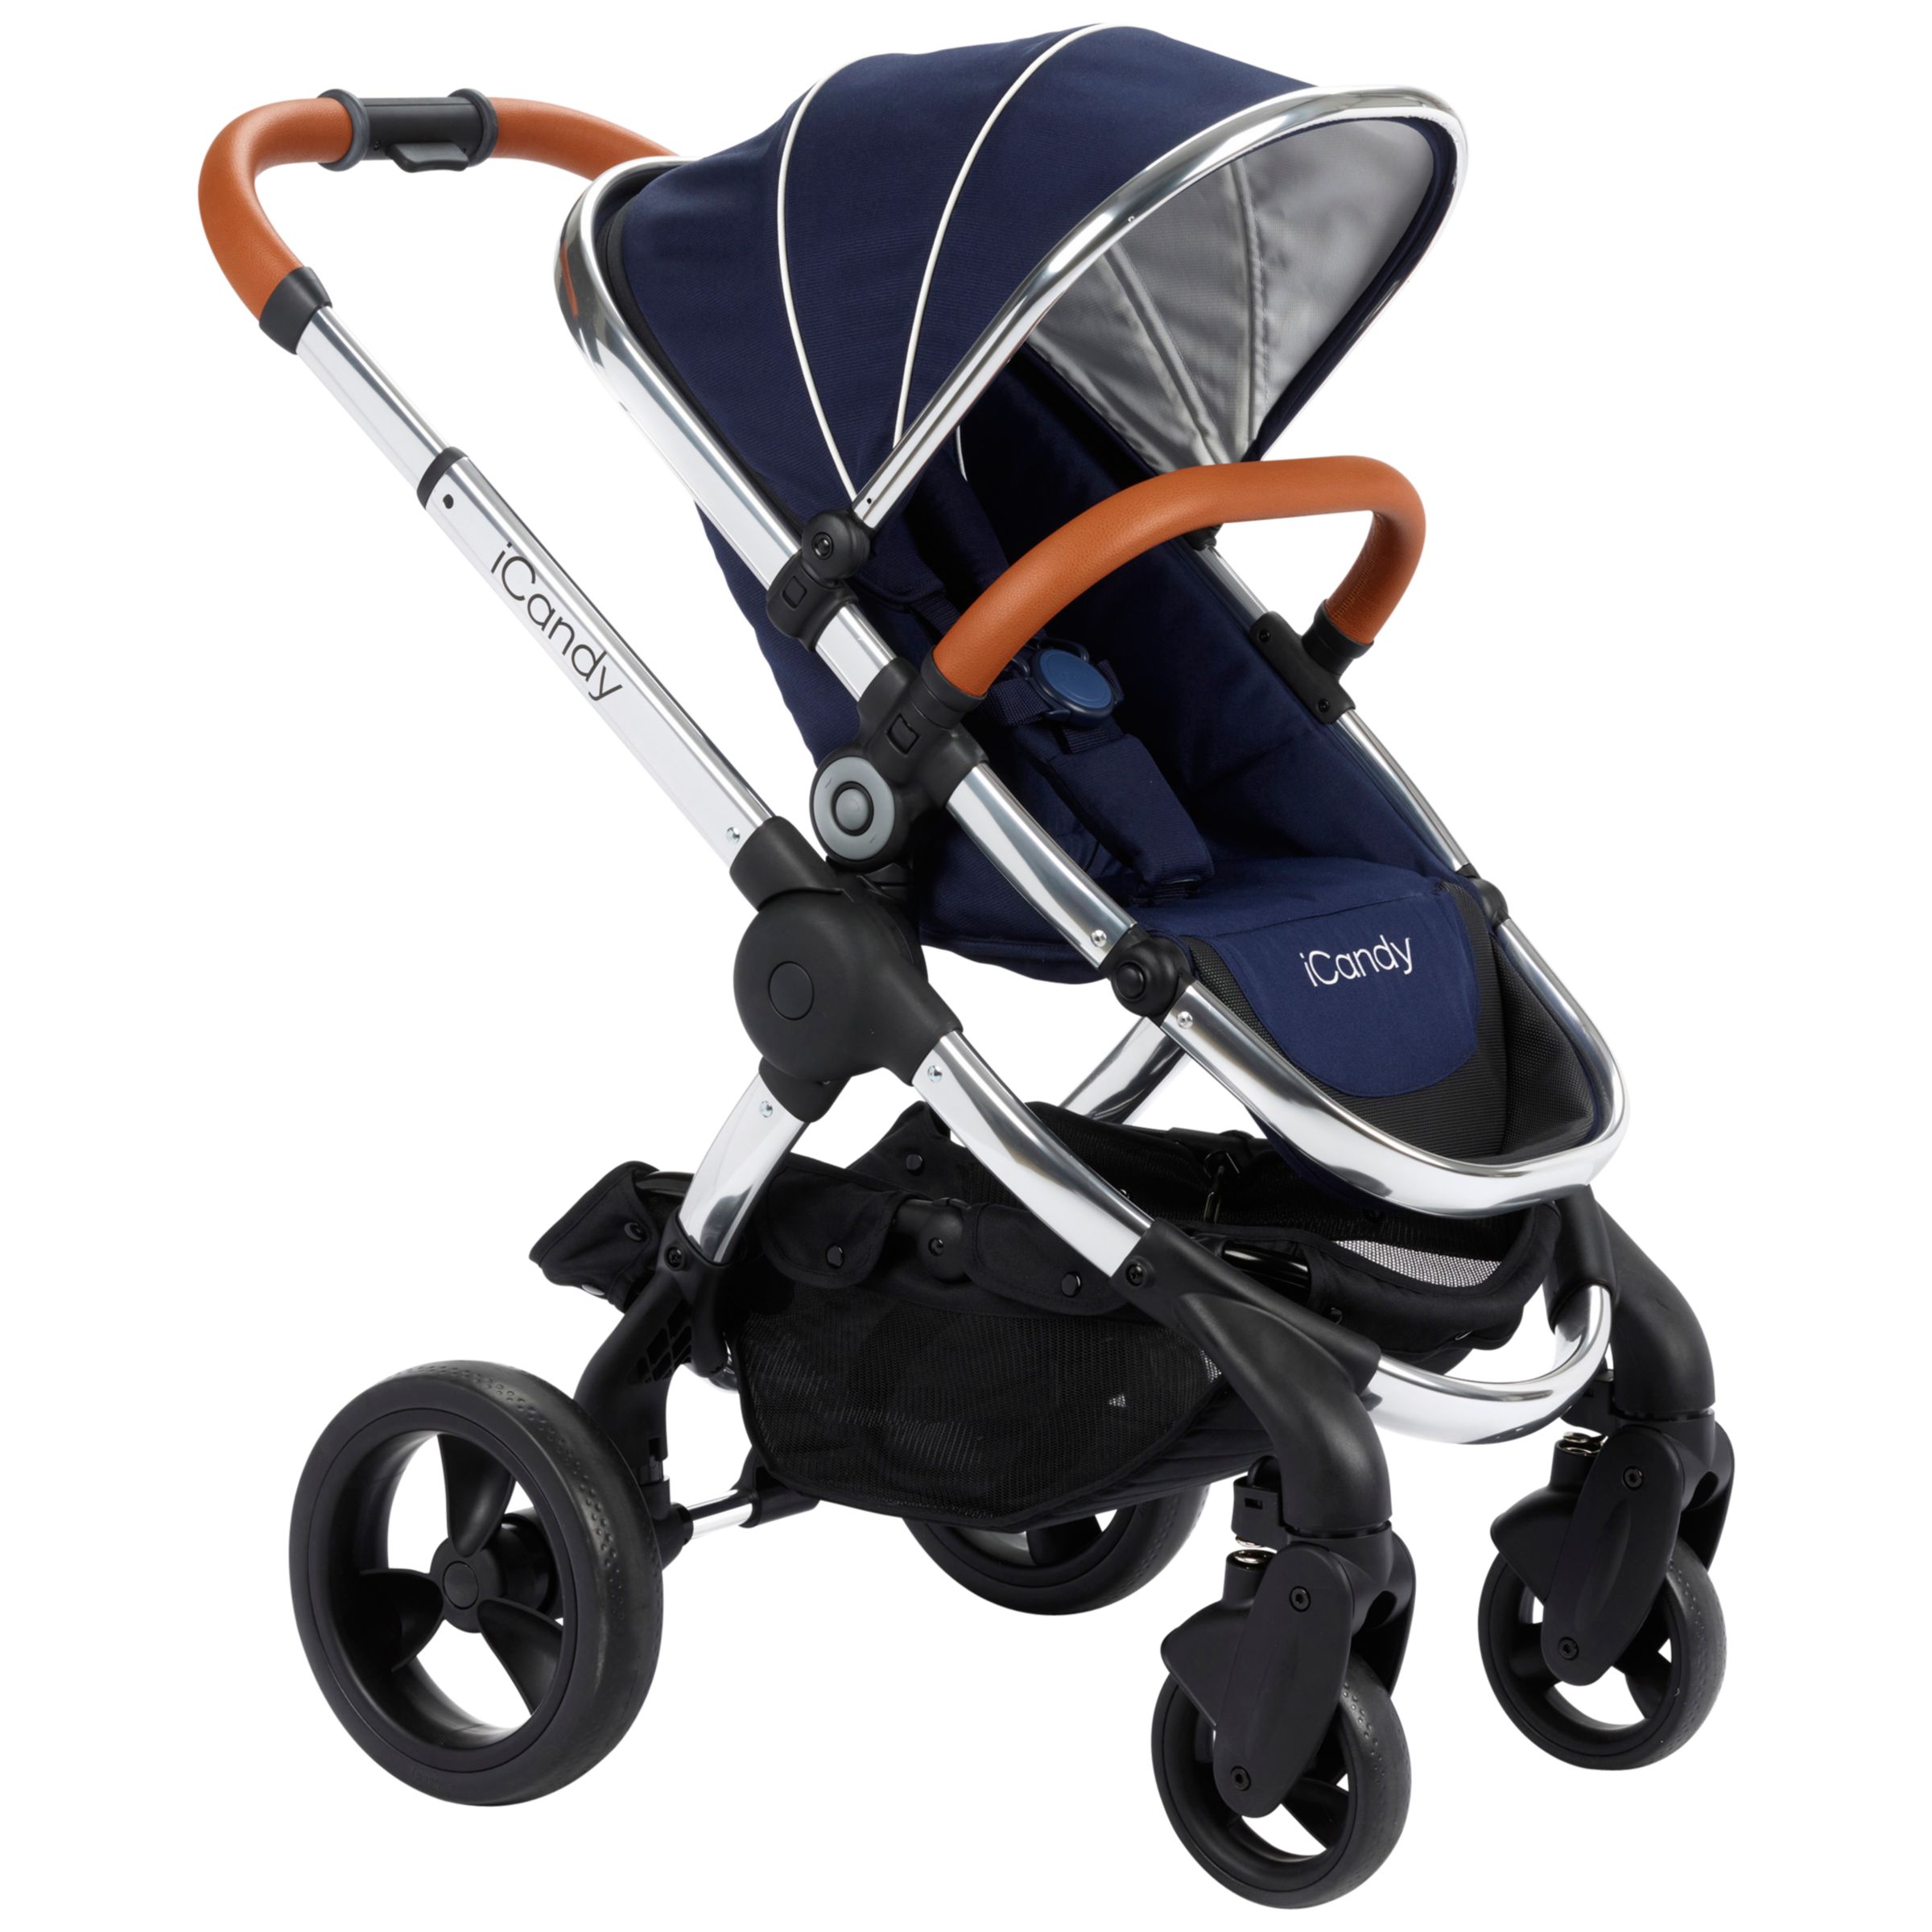 iCandy Peach Pushchair with Chrome Chassis & Royal Hood